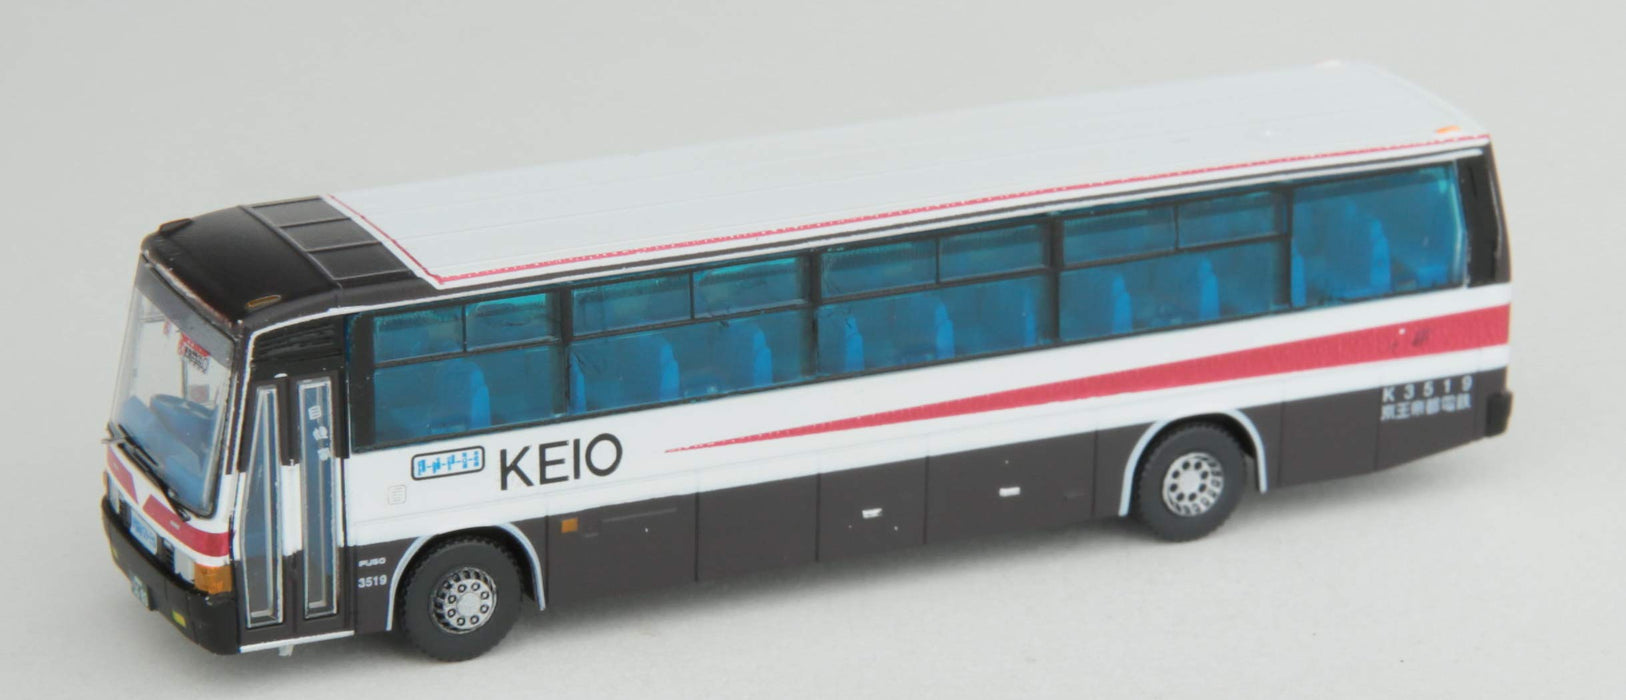 Tomytec 50th Anniversary Chuo Expressway Bus Collection Set of 2 - Limited Edition Diorama Supplies